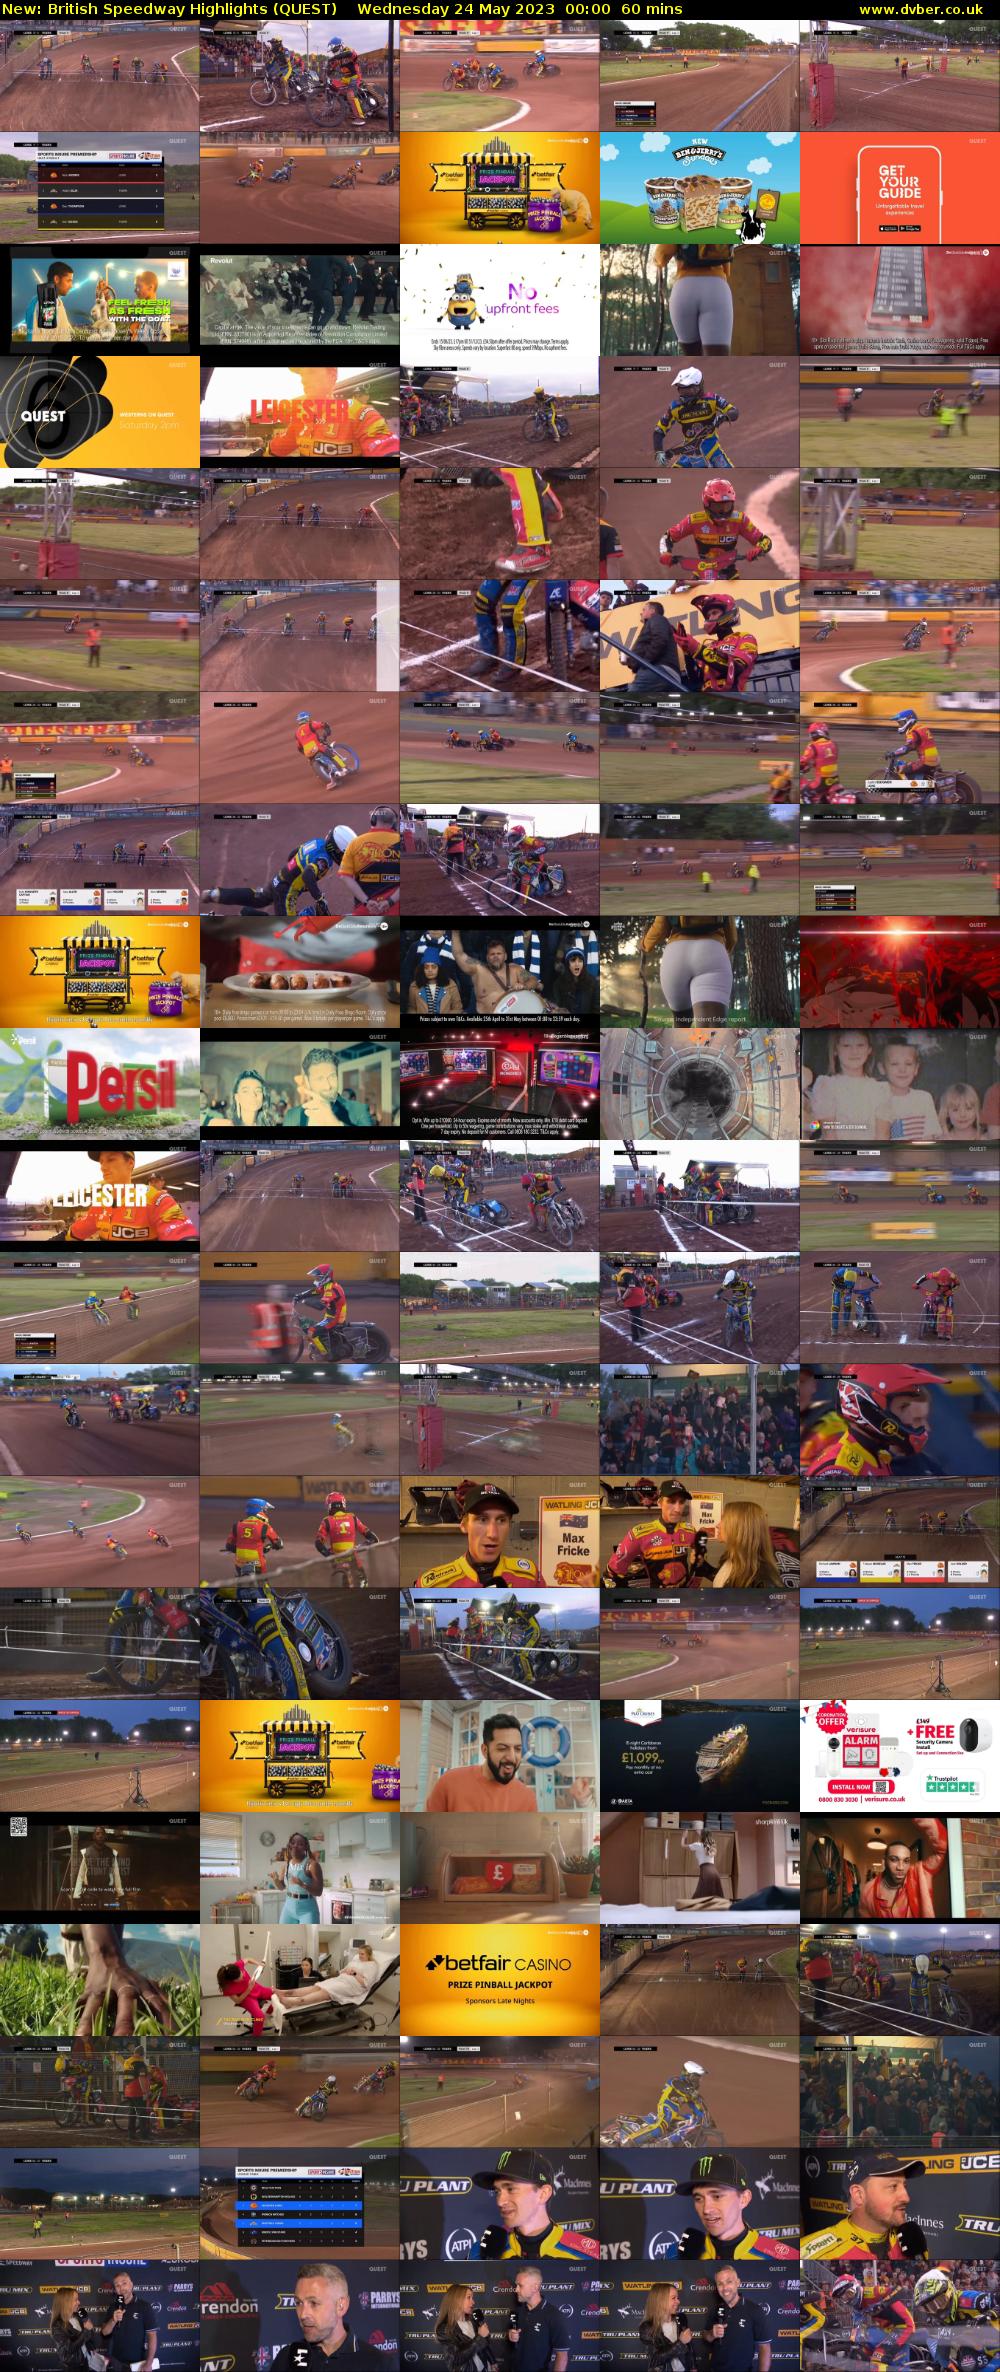 British Speedway Highlights (QUEST) Wednesday 24 May 2023 00:00 - 01:00